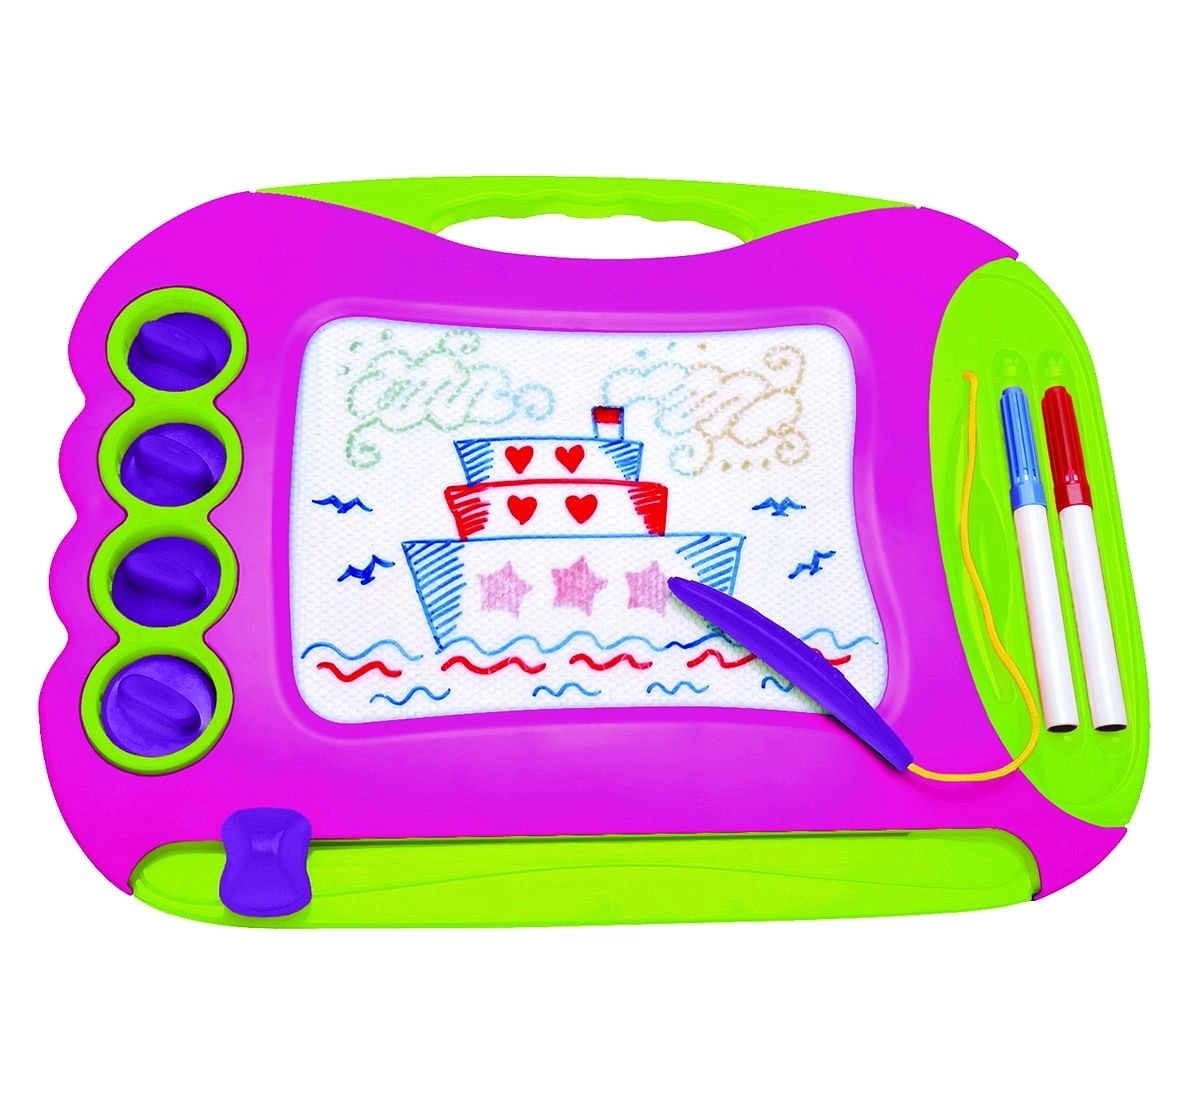 Youreka 2 in1 Magic Writer - Pink Activity Table & Boards for Kids age 18M + (Blue)